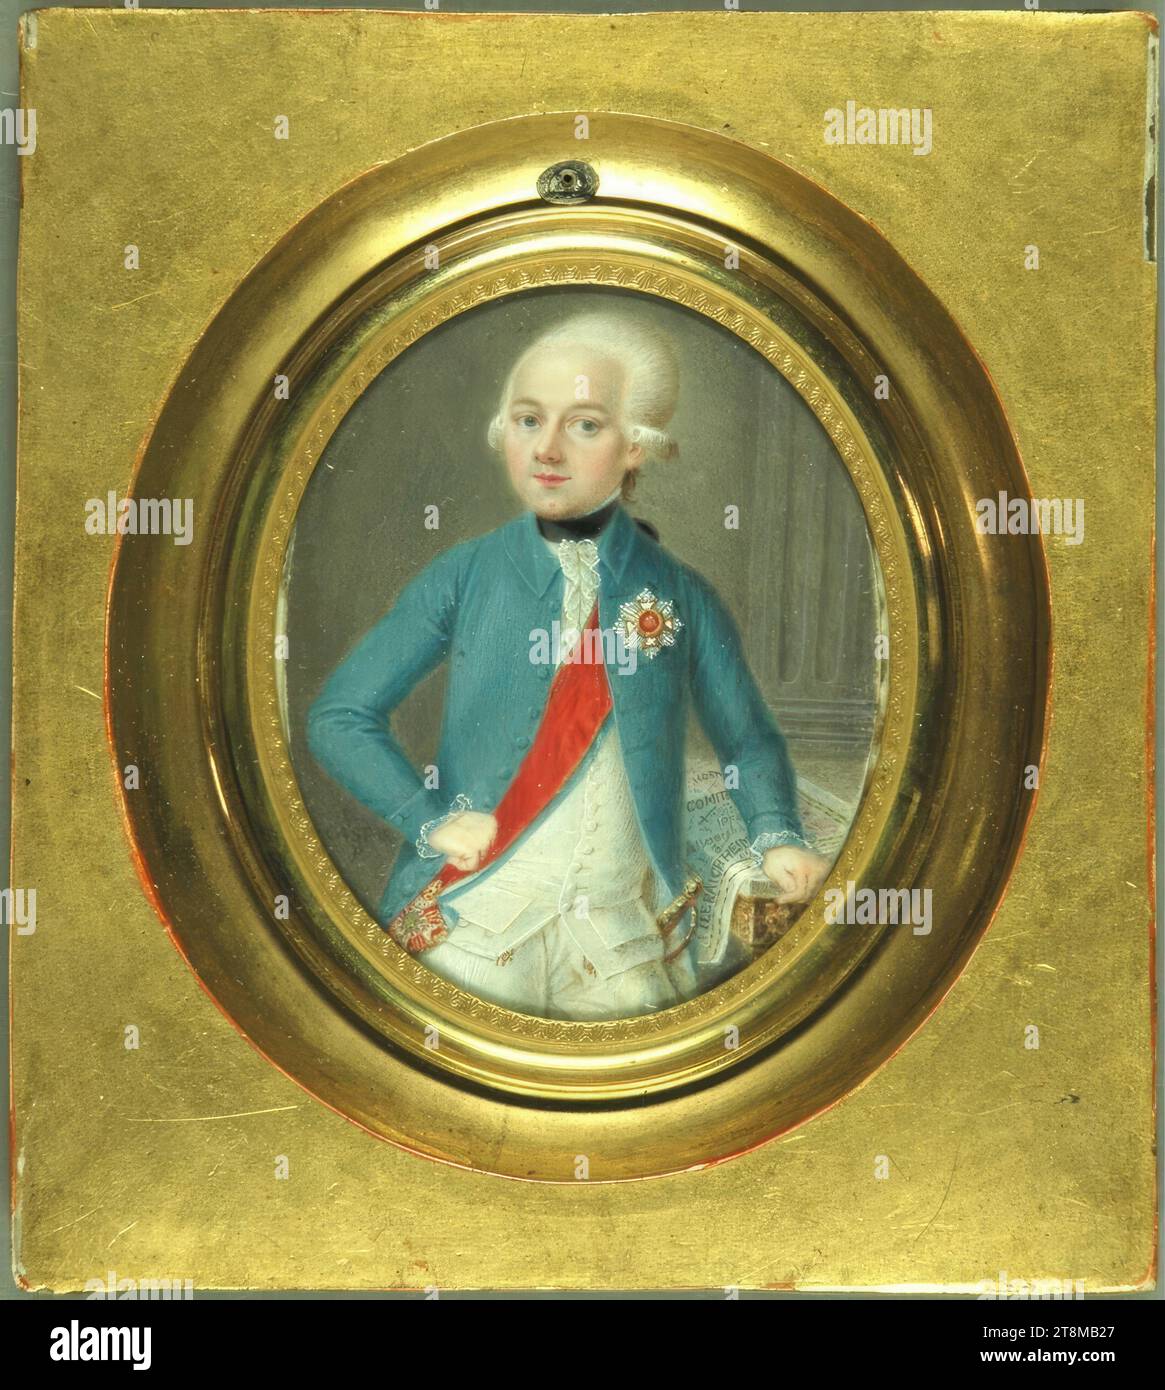 Chevalier Joseph Solignac-Peschiera in blue uniform with red sash and medals, standing next to a table, Carl Caspar (Wurzbach/Schwaben 1747 - 1809 Vienna), 1774, drawing, watercolor on ivory, 7.7 x 6.4 cm, on the Reverse marked: 'Chevalier Joseph Solignae Peschiera., Minister Resident of the Republic, Genoa at the Vienna Court, under Empress Maria Theresa, anno 74 Stock Photo